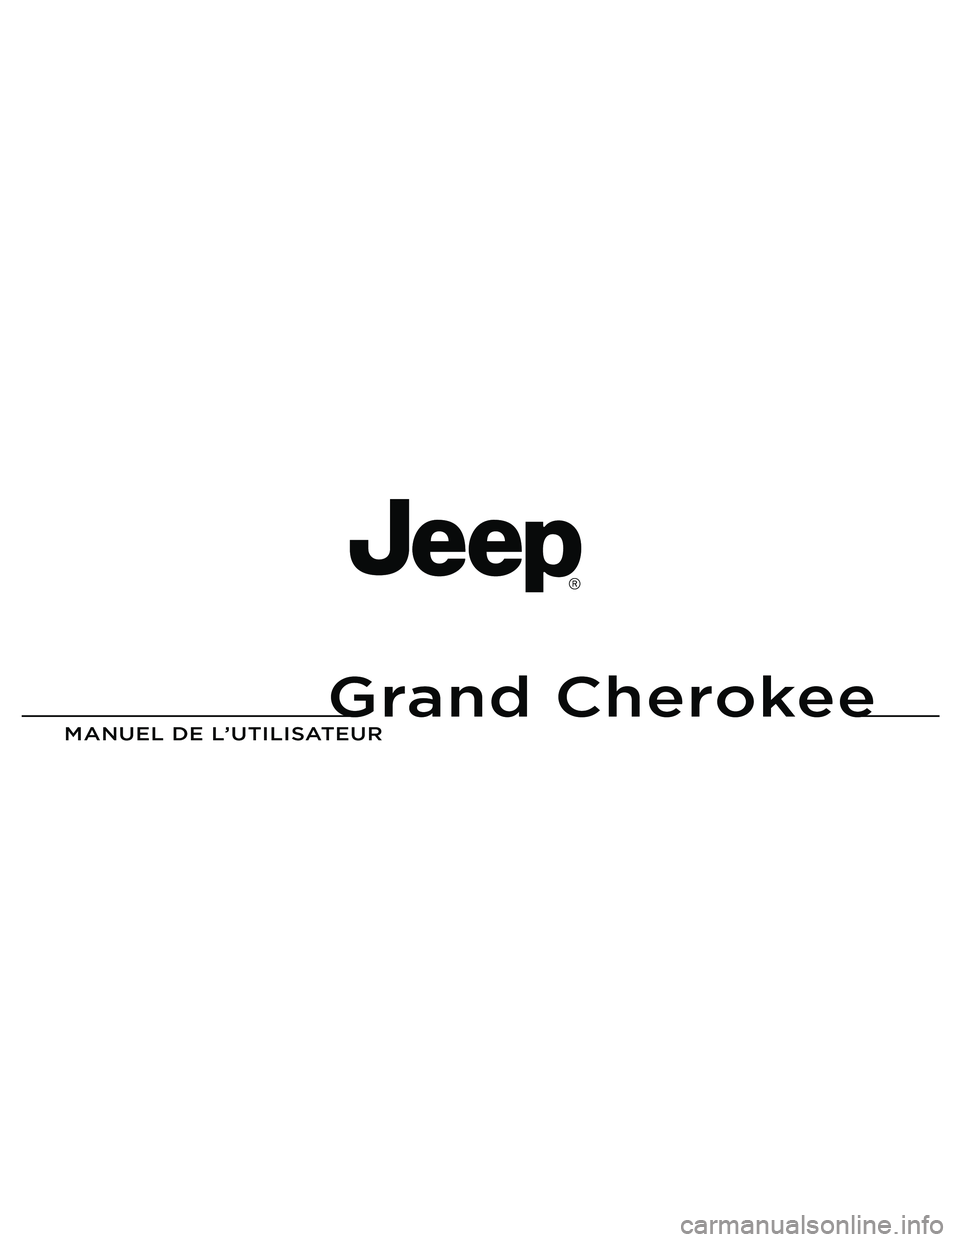 JEEP GRAND CHEROKEE 2011  Notice dentretien (in French) 